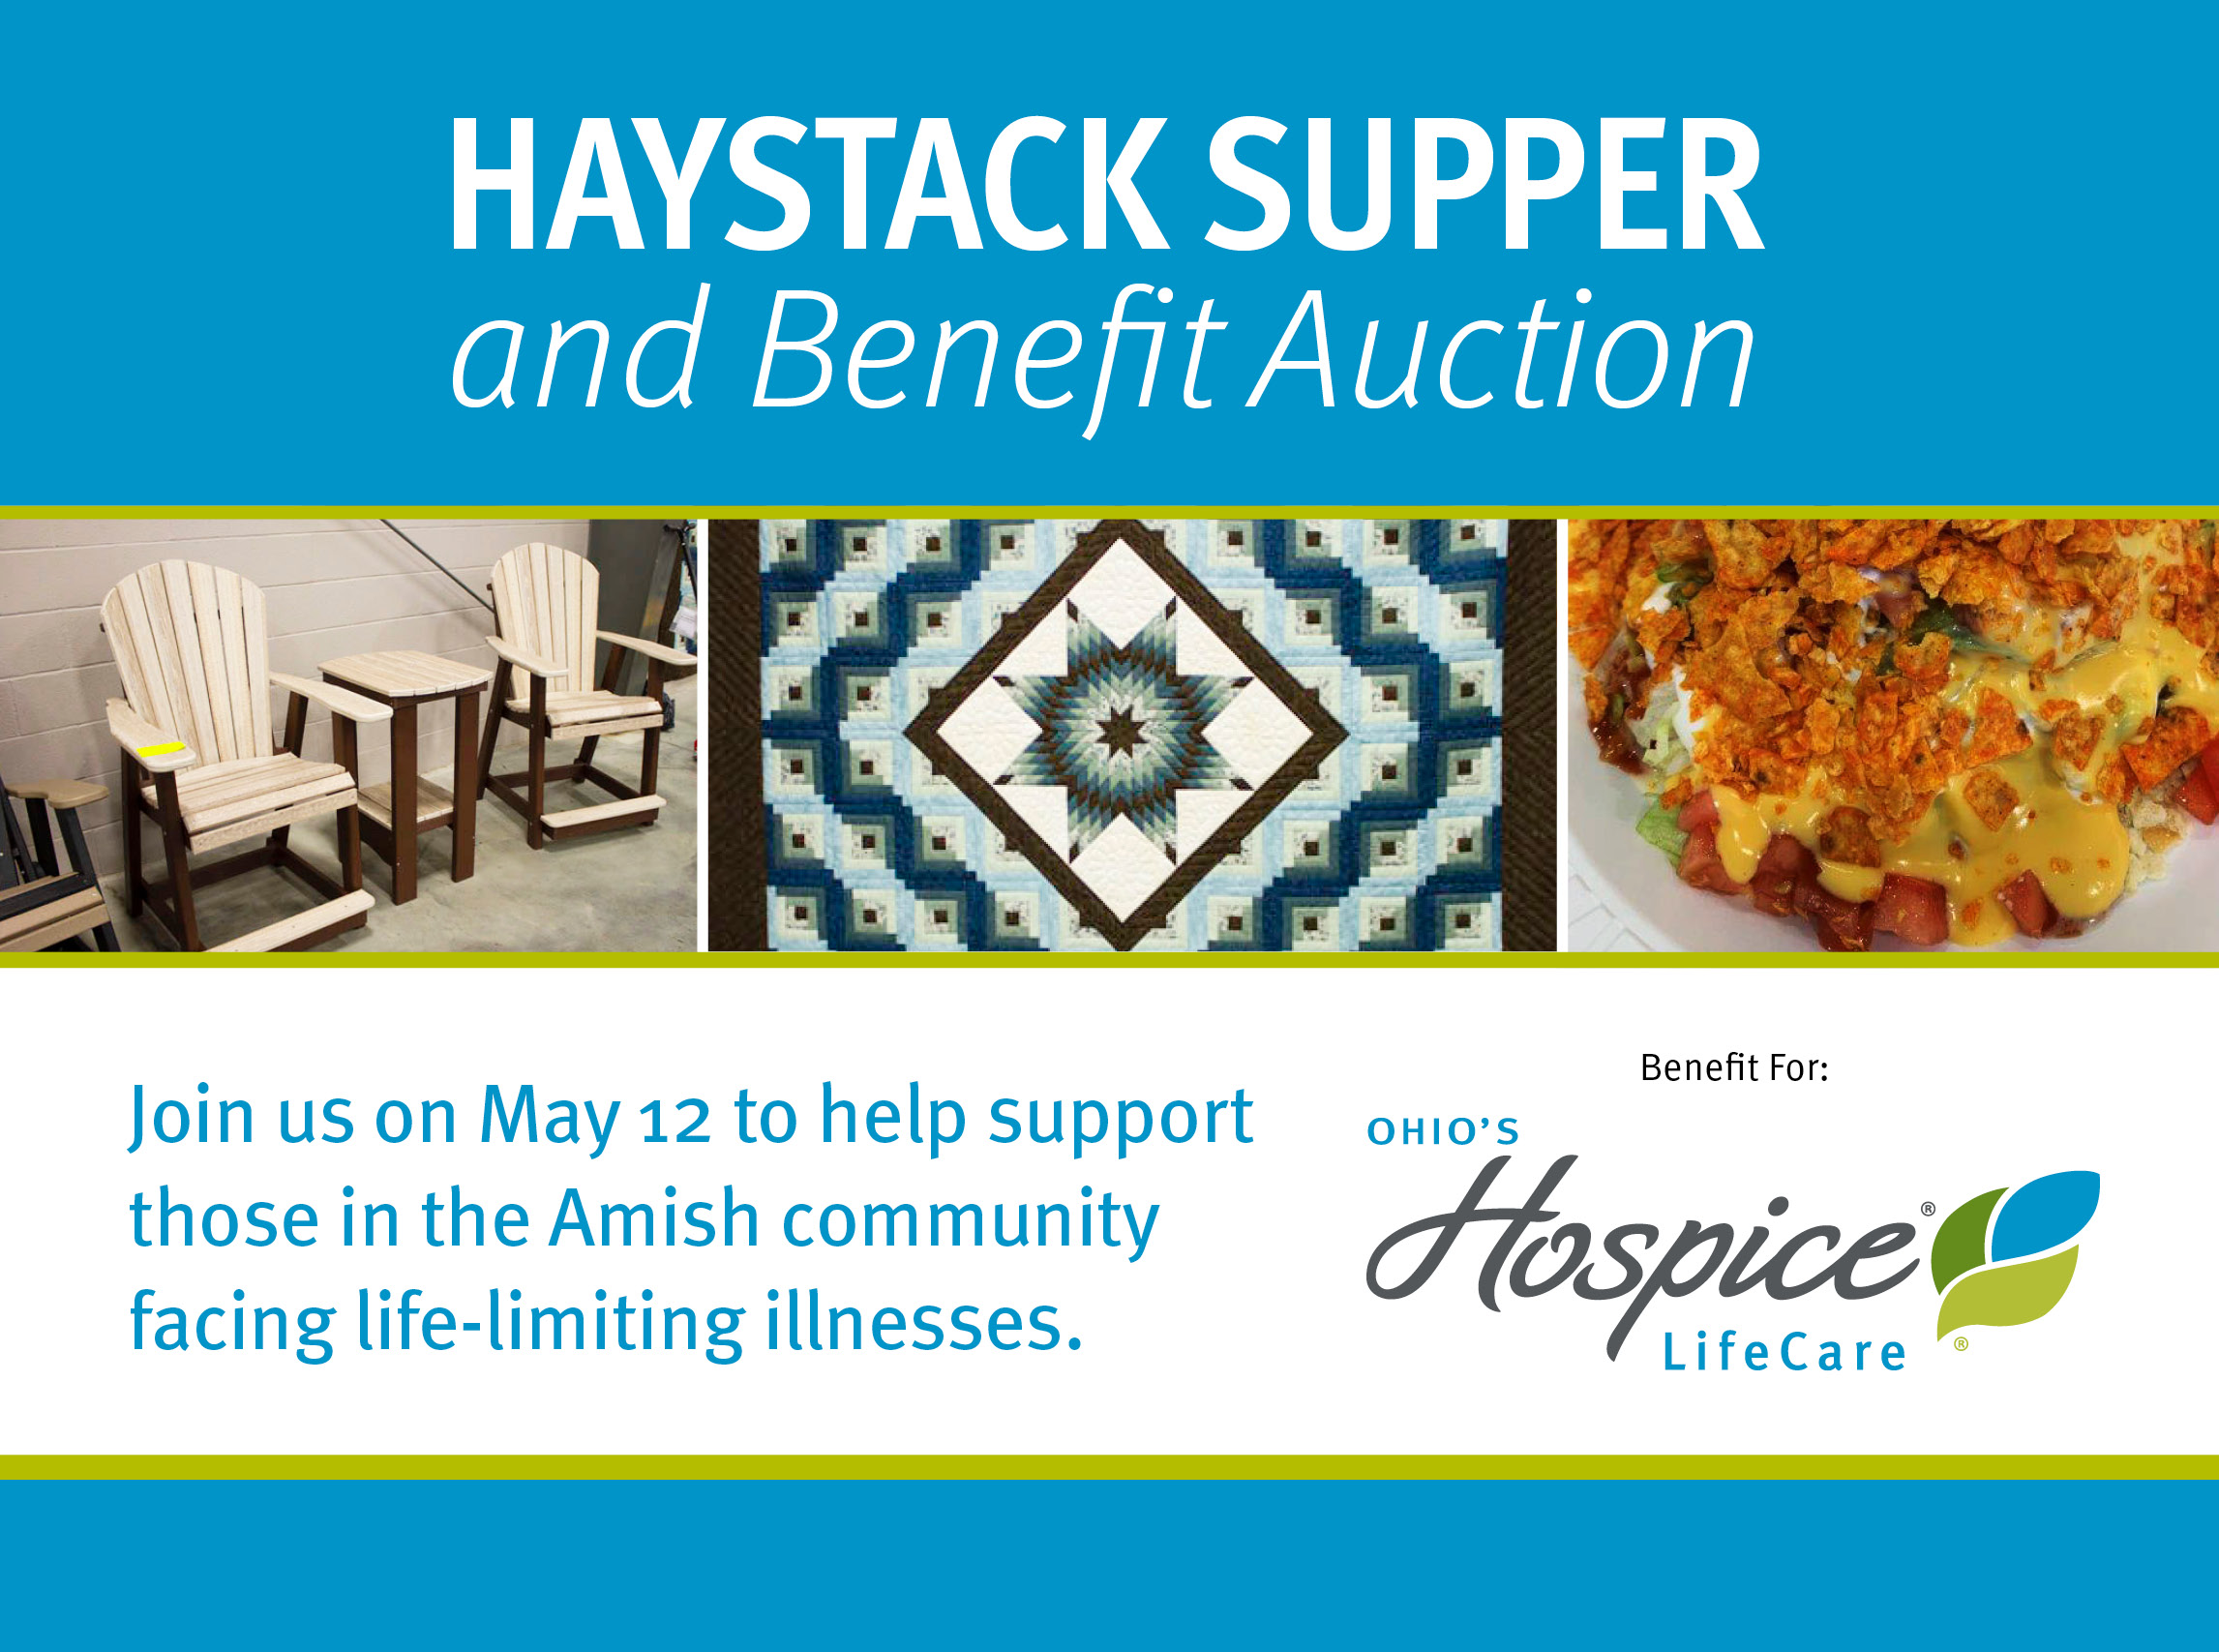 Haystack Supper and Benefit Auction. Join us on May 12 to help support those in the Amish community facing life-limiting illnesses. Ohio's Hospice LifeCare